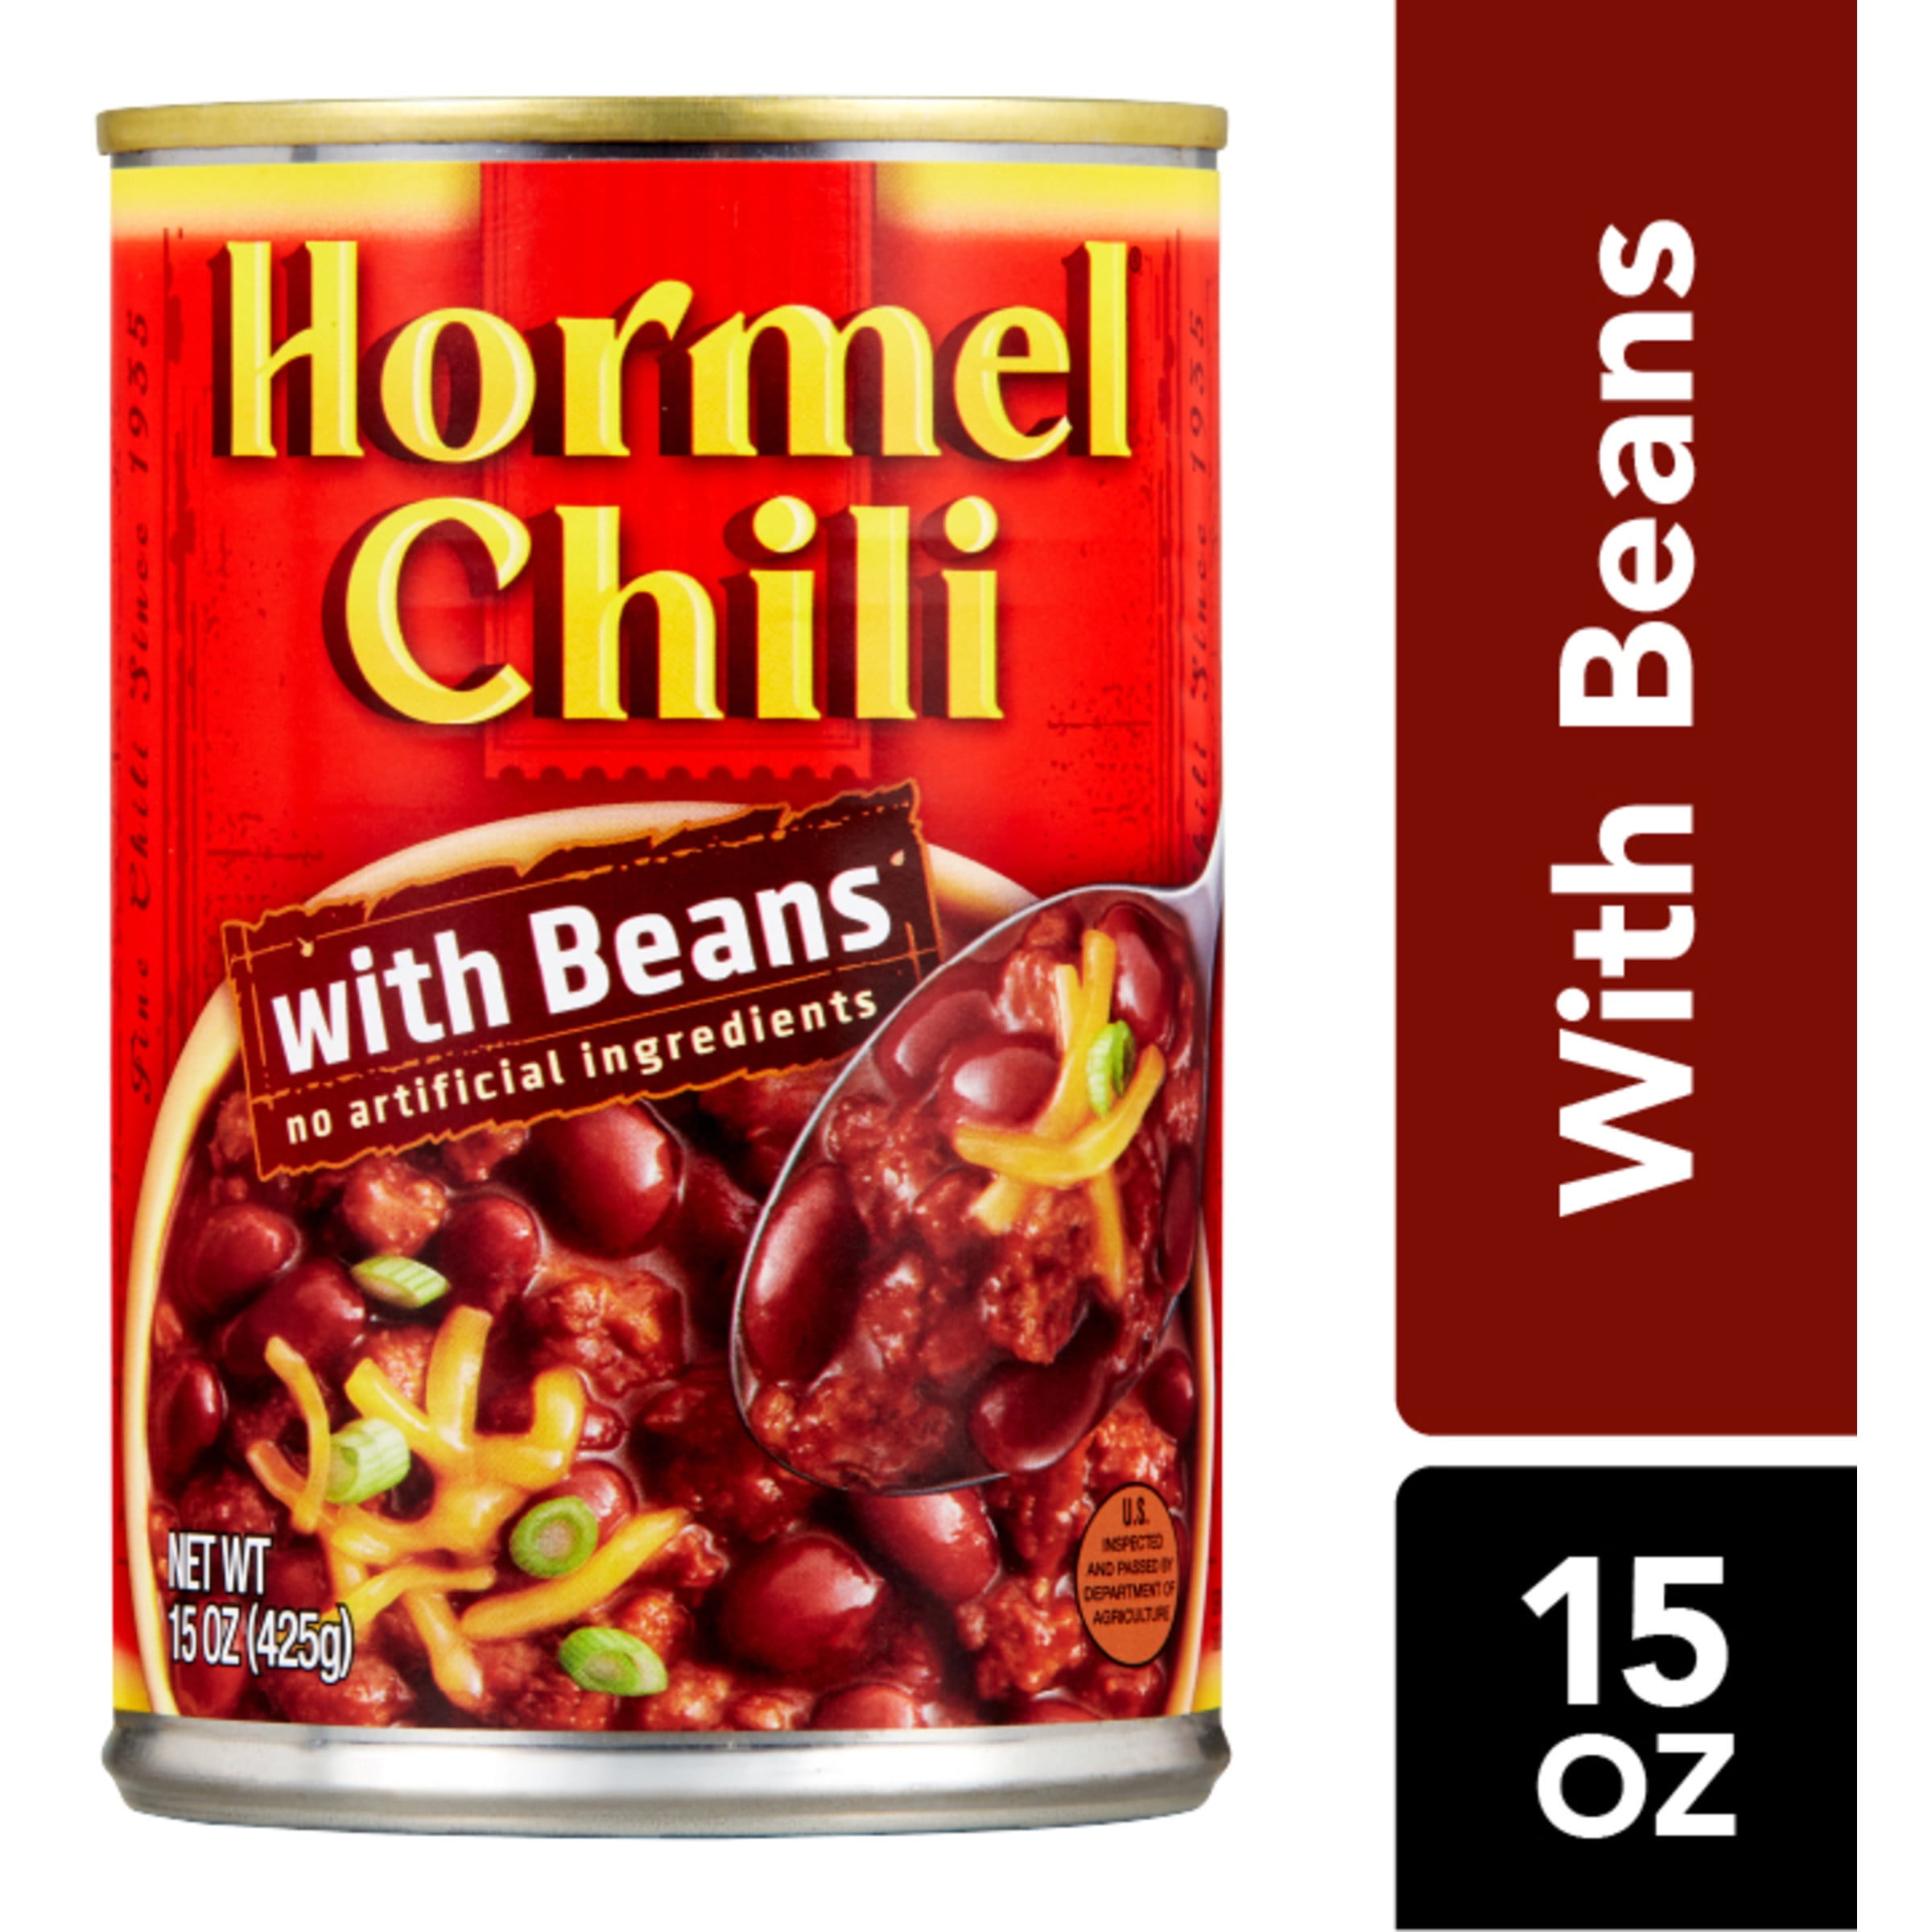 HORMEL Chili with Beans 15 oz